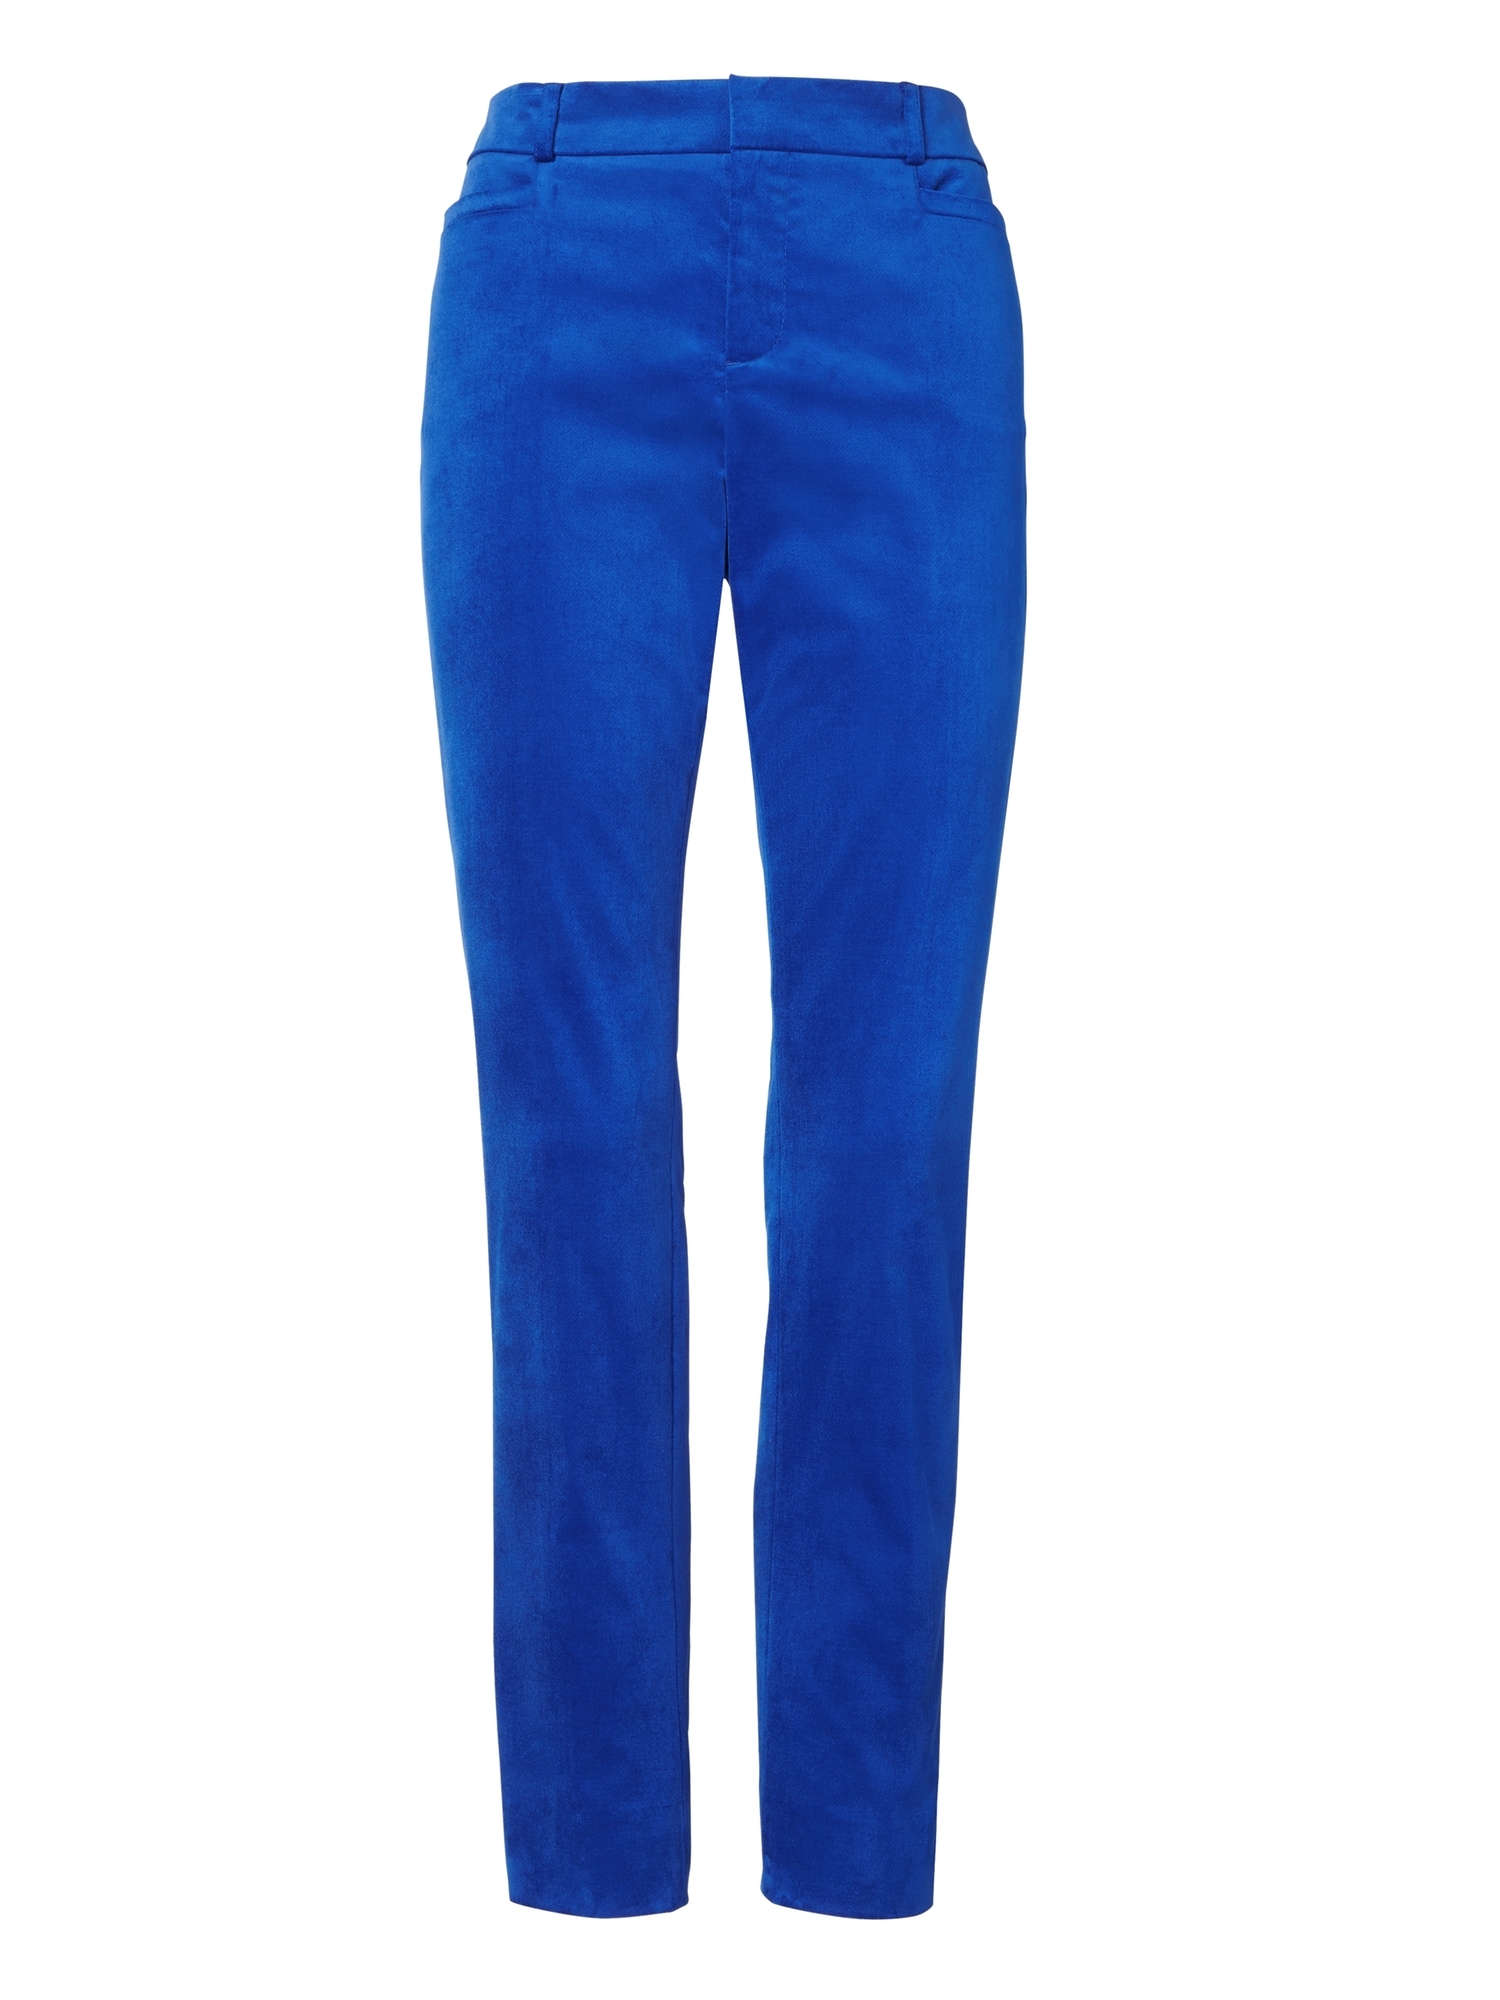 The Best Velvet Pants To Wear Now - 50 IS NOT OLD - A Fashion And Beauty  Blog For Women Over 50